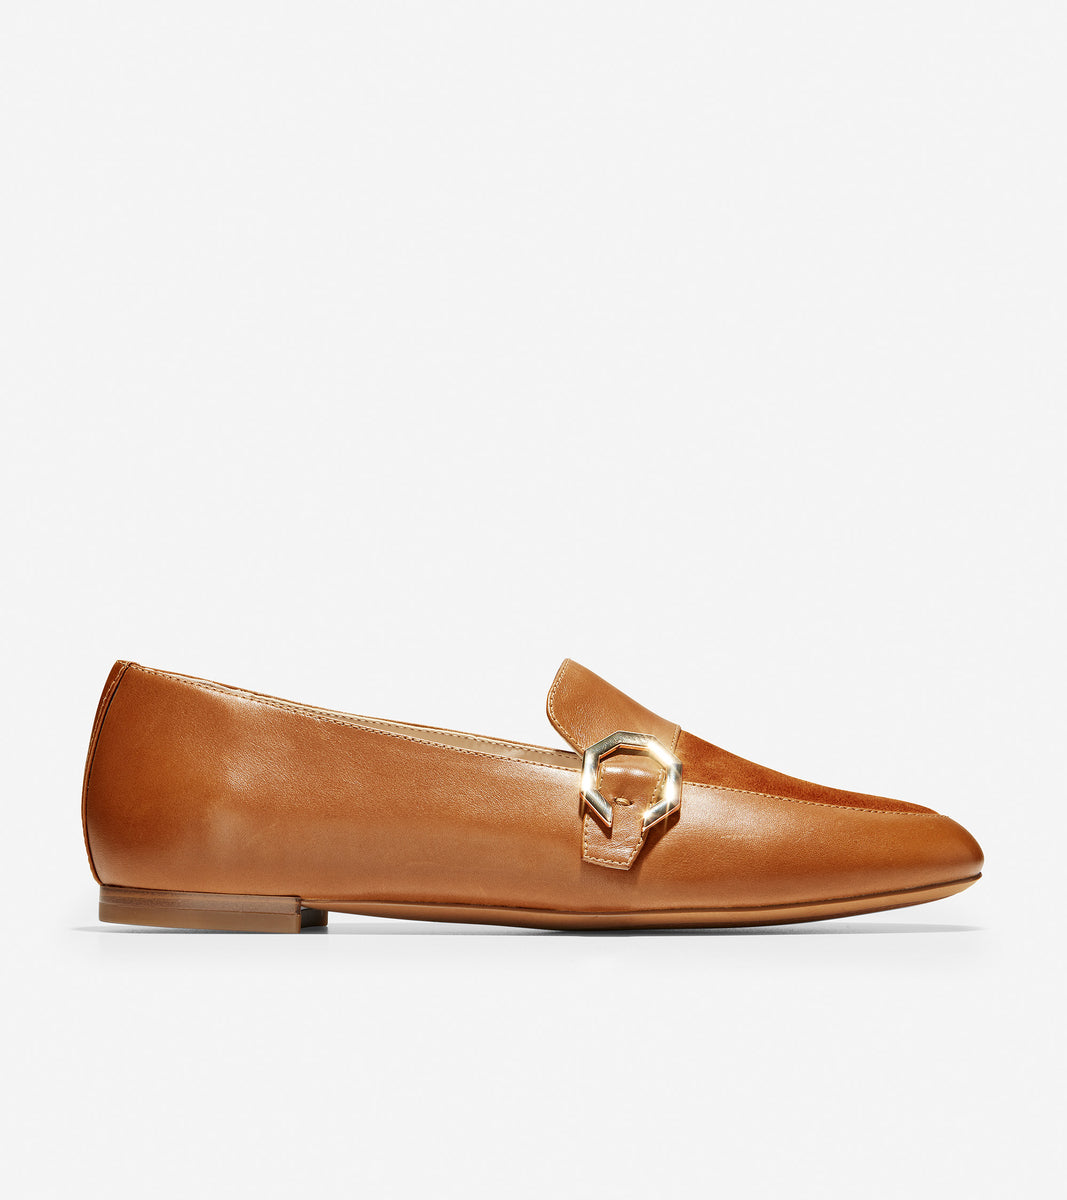 ColeHaan-Teresa Loafer-w15863-British Tan Leather-Suede